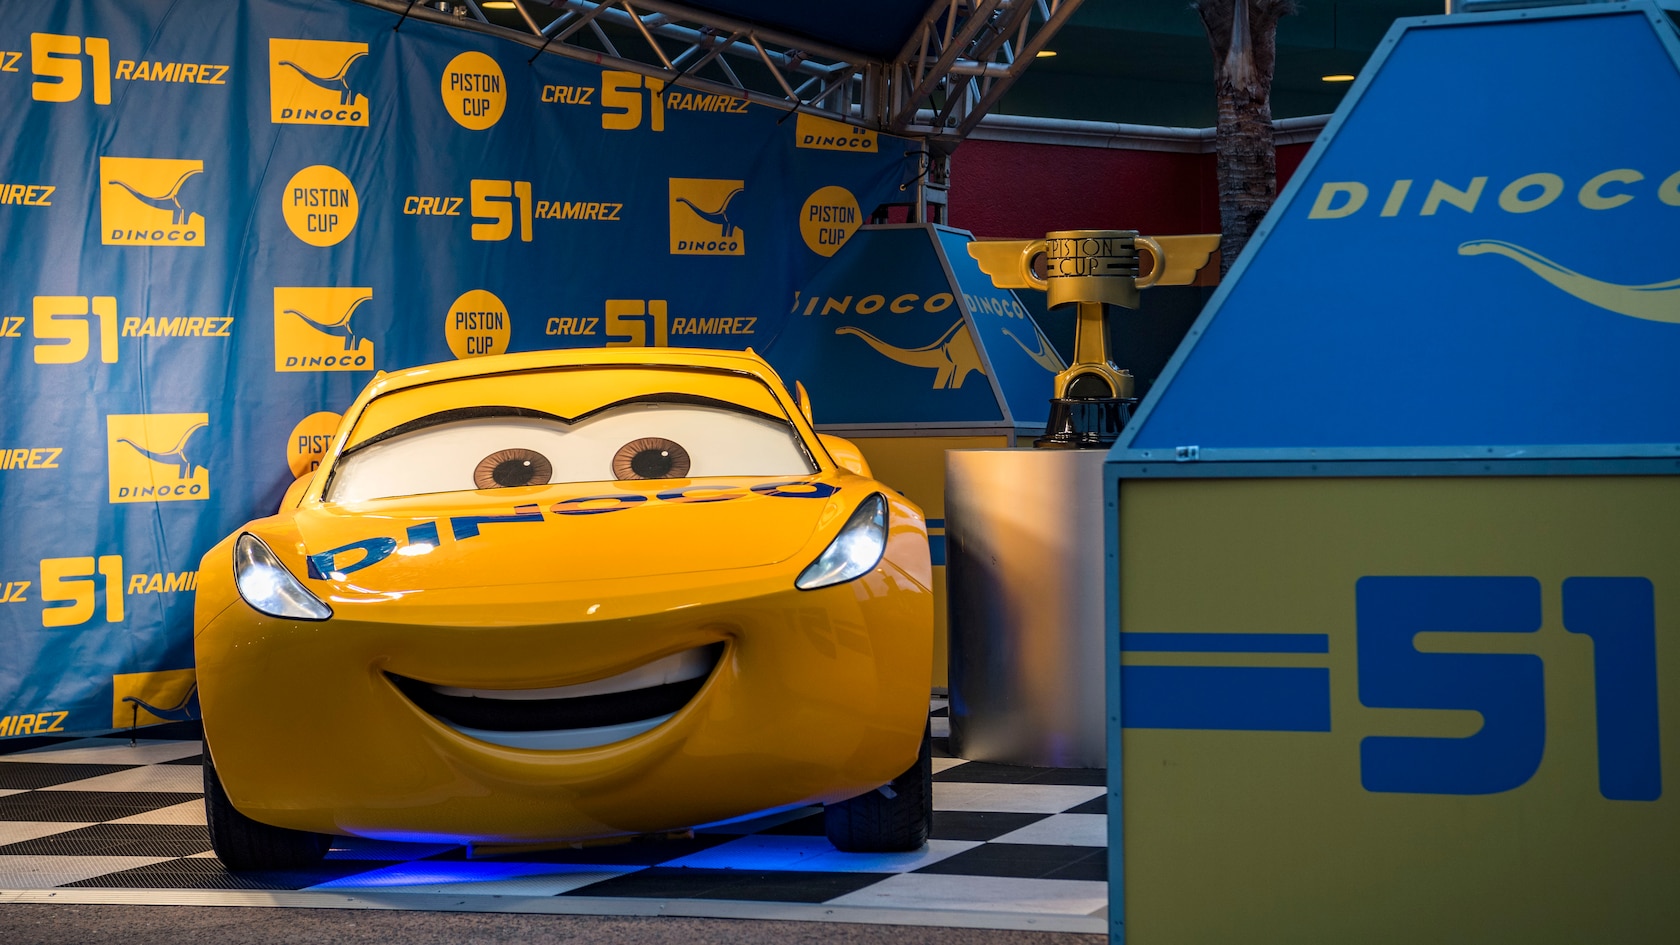 Cars' Lightning McQueen revs up for solo show at Hollywood Studios